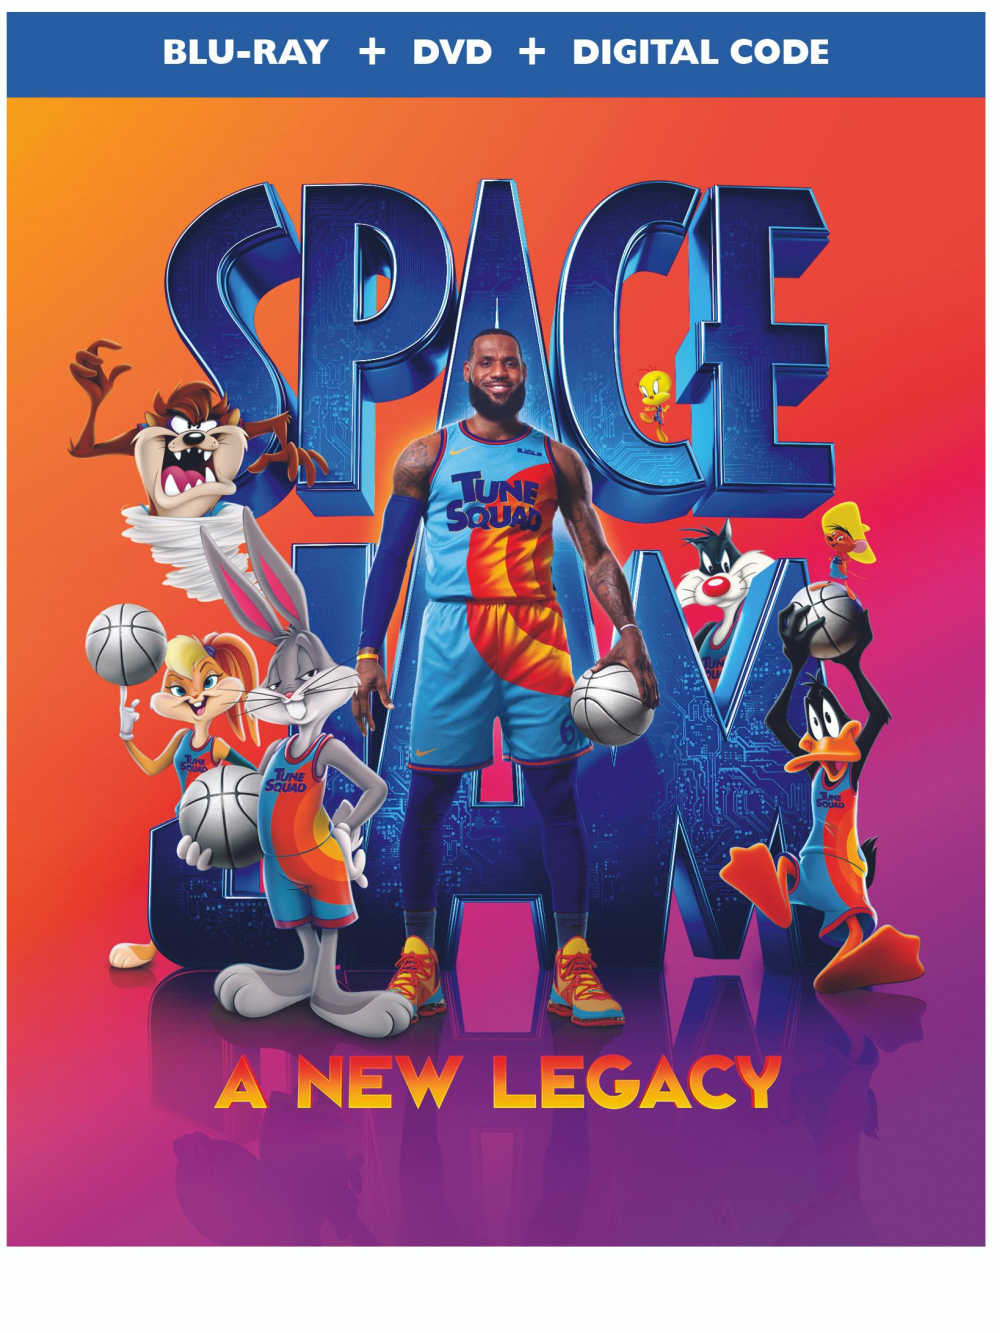 Finally, it's time to order your Space Jam 2 blu-ray, so you and your family can watch this new classic over and over again!